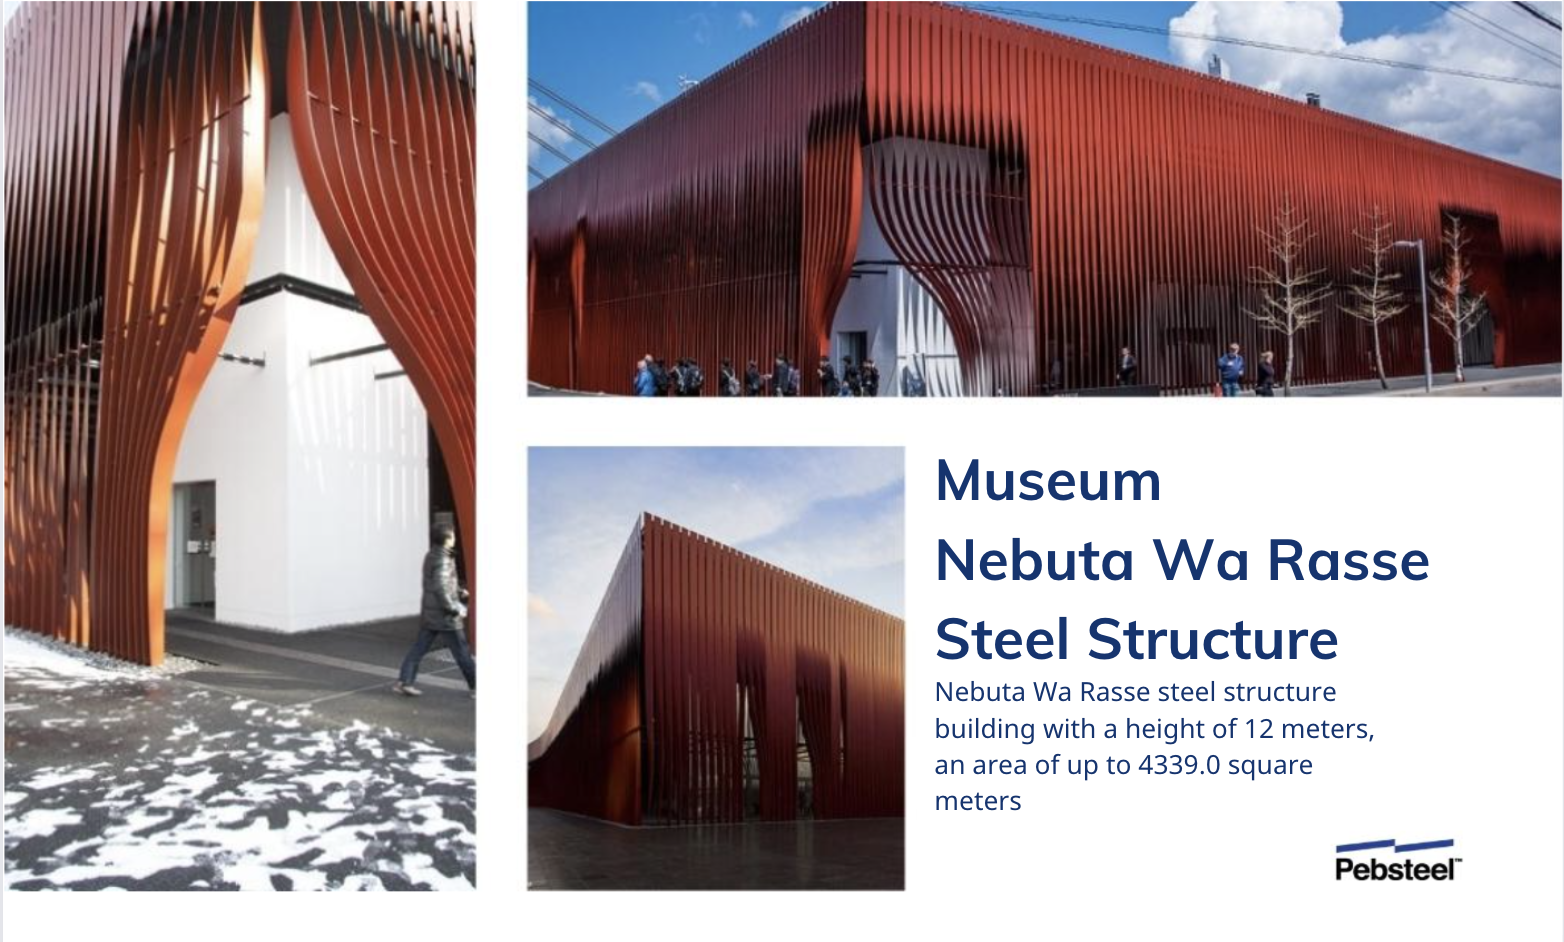 Nebuta Museum is made from steel frames